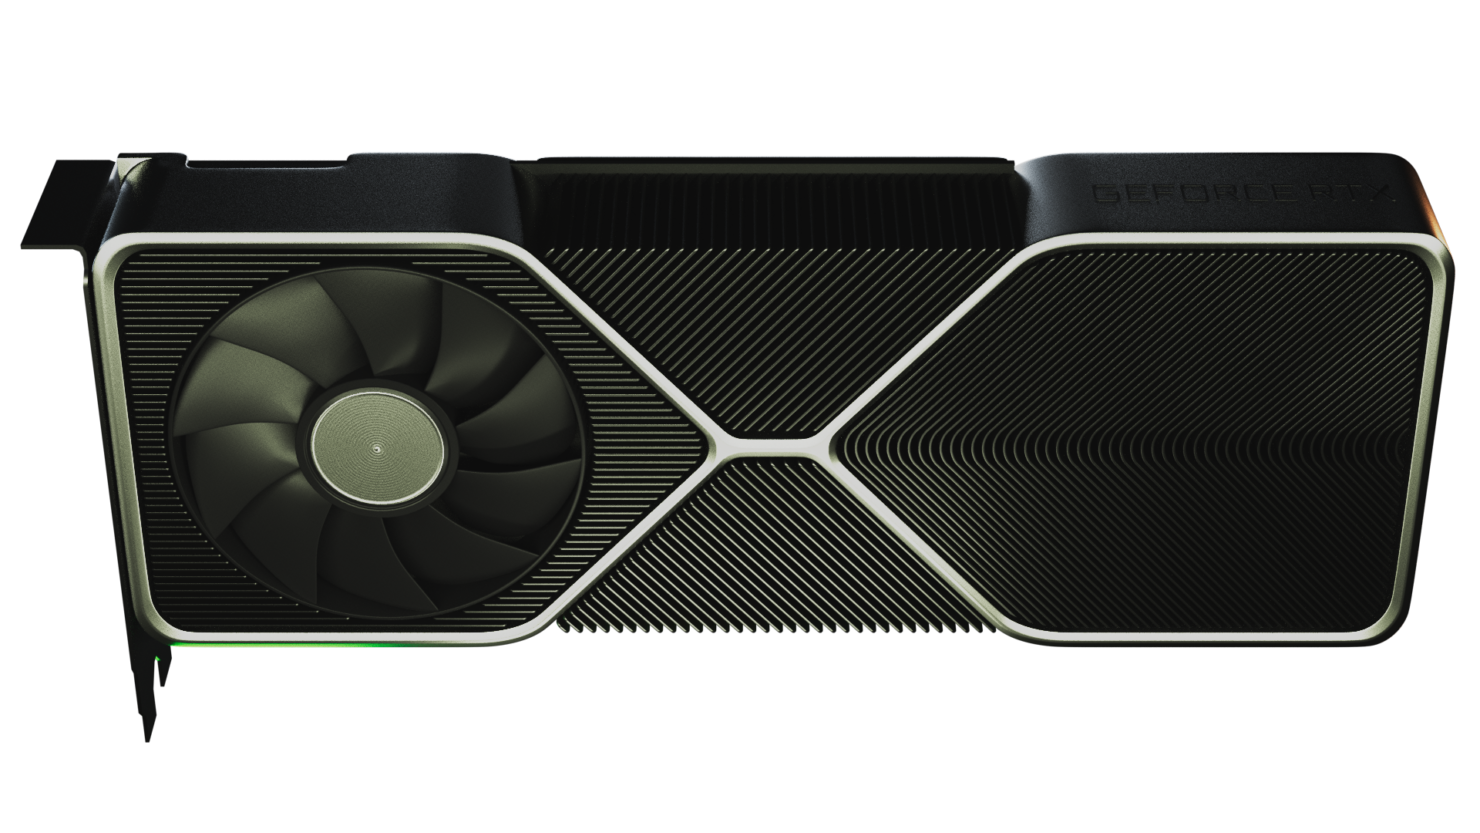 NVIDIA GeForce RTX 3xxx (3090/3080) to enter mass production in